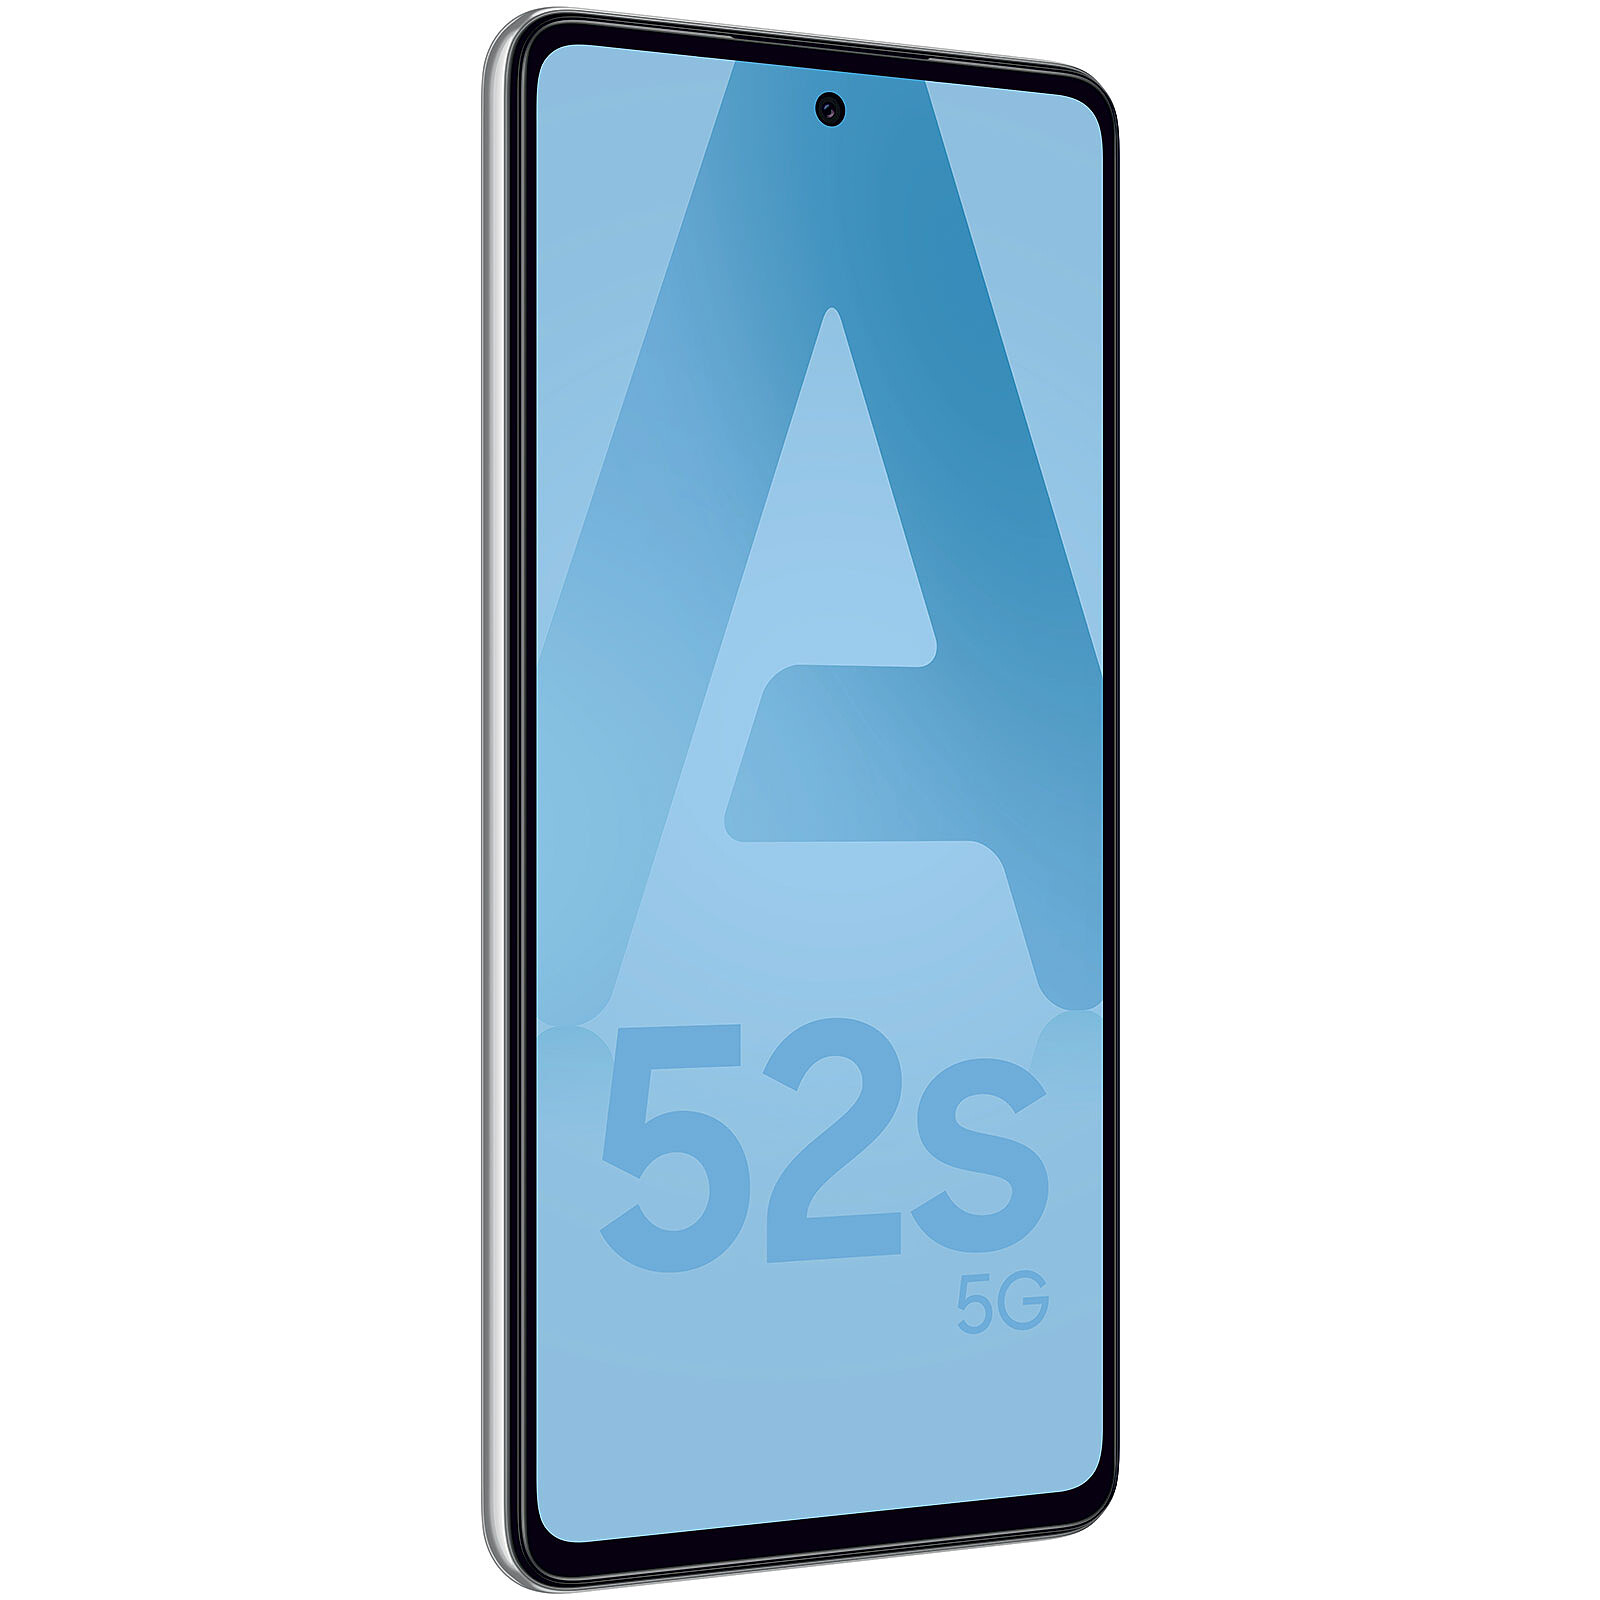 Samsung Galaxy A52s 5G v2 White - Mobile phone & smartphone - LDLC 3-year  warranty